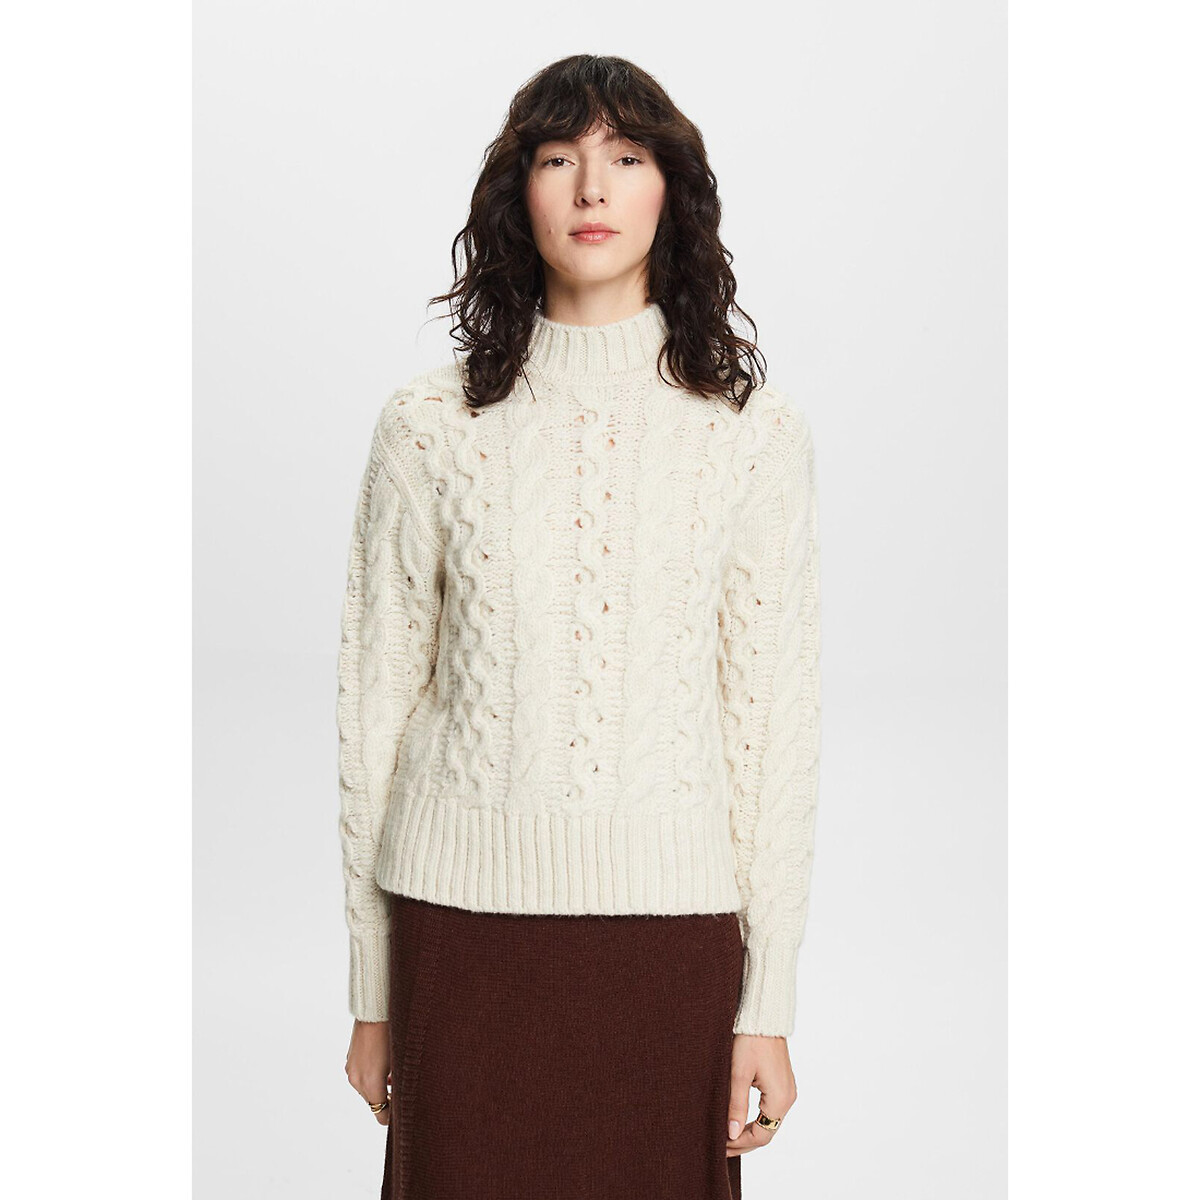 Chunky Cable Knit Jumper with Crew Neck